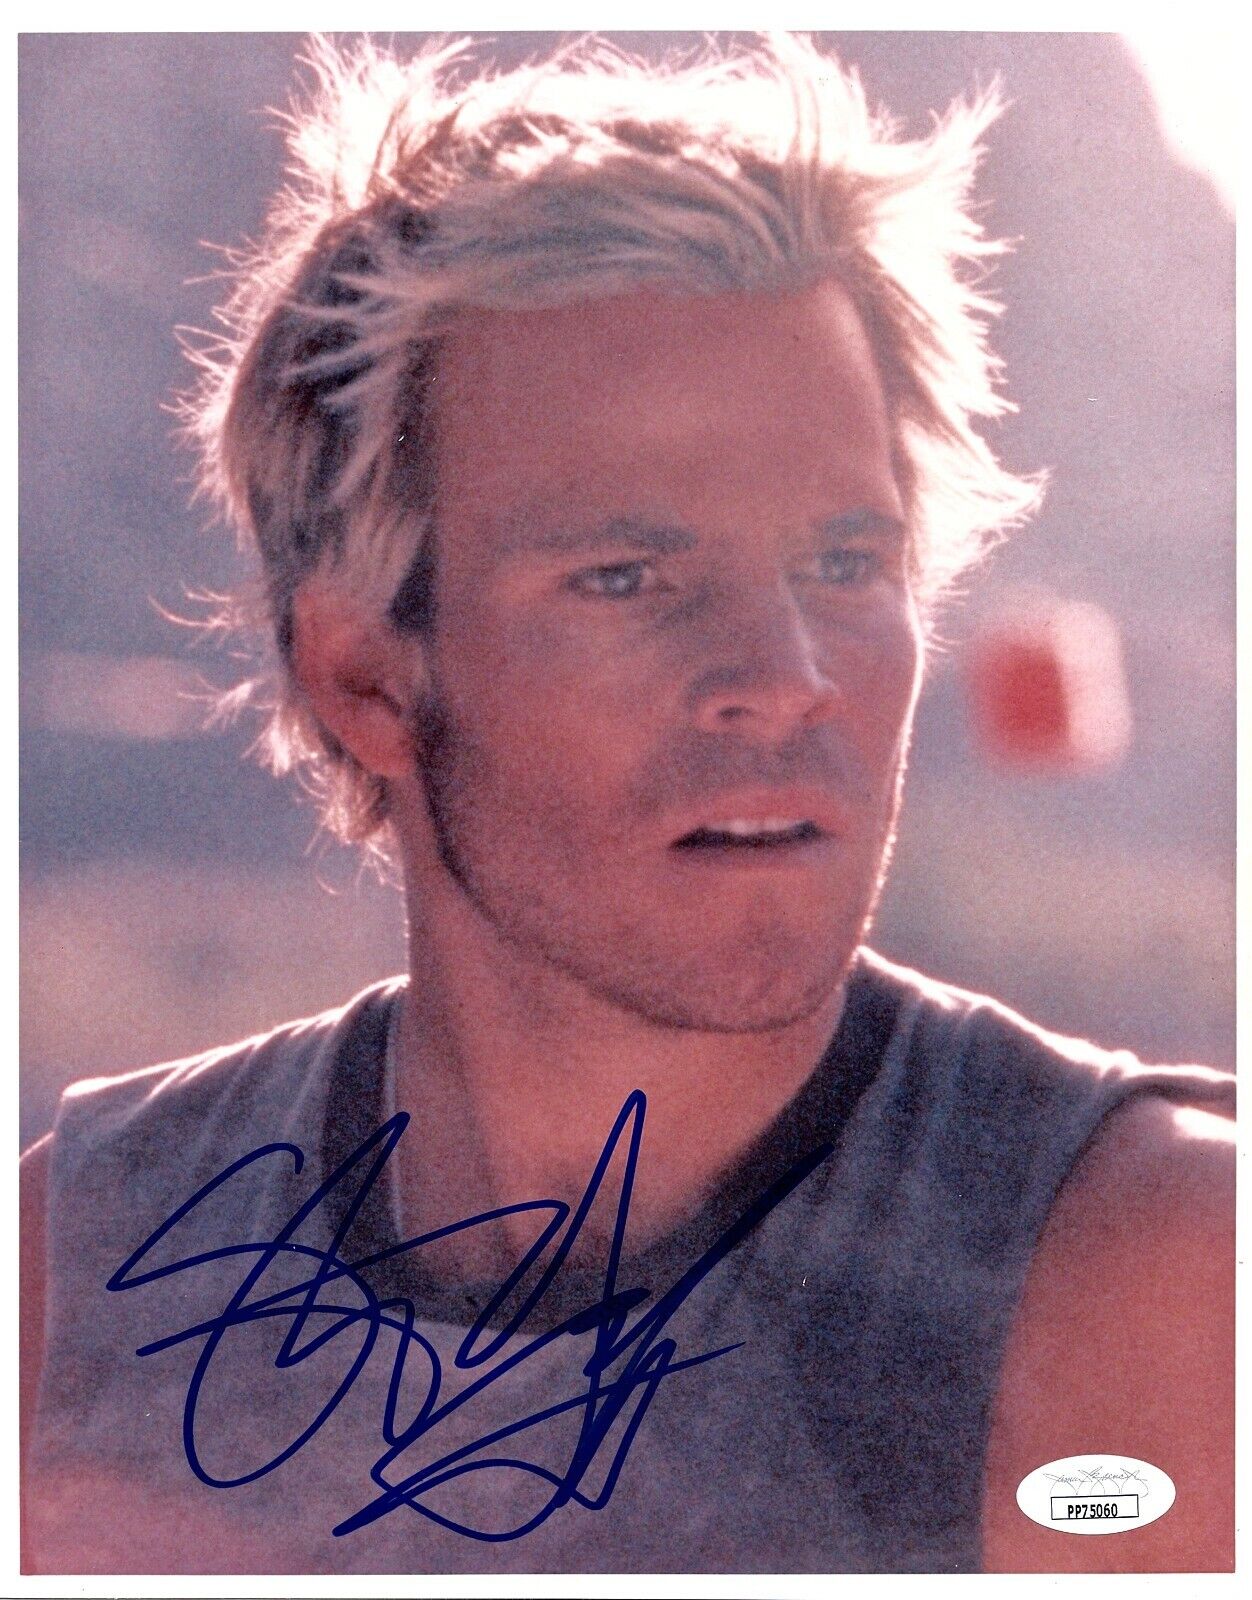 STEPHEN DORFF Autographed SIGNED 8x10 Photo Poster painting TRUE DETECTIVE BLADE JSA CERTIFIED